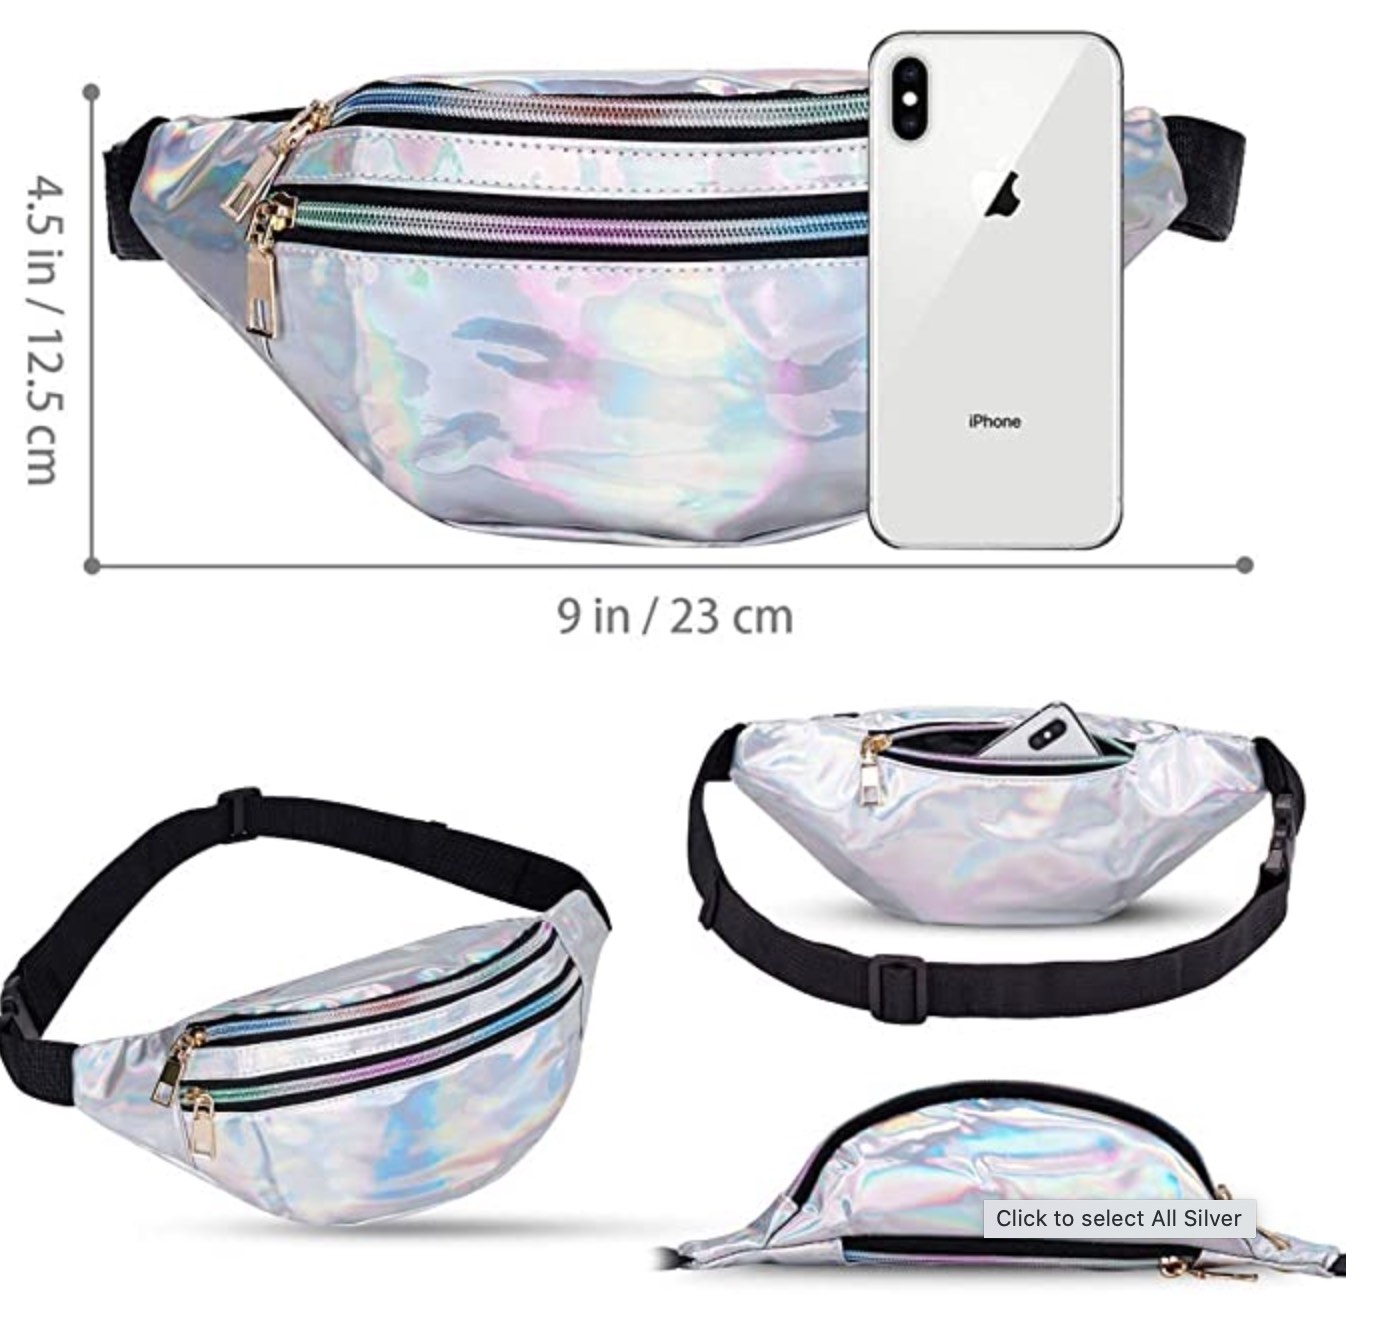 Dolce Na Checkerboard Fanny Pack Festival Rave Waist Pack Beach Bum Bags